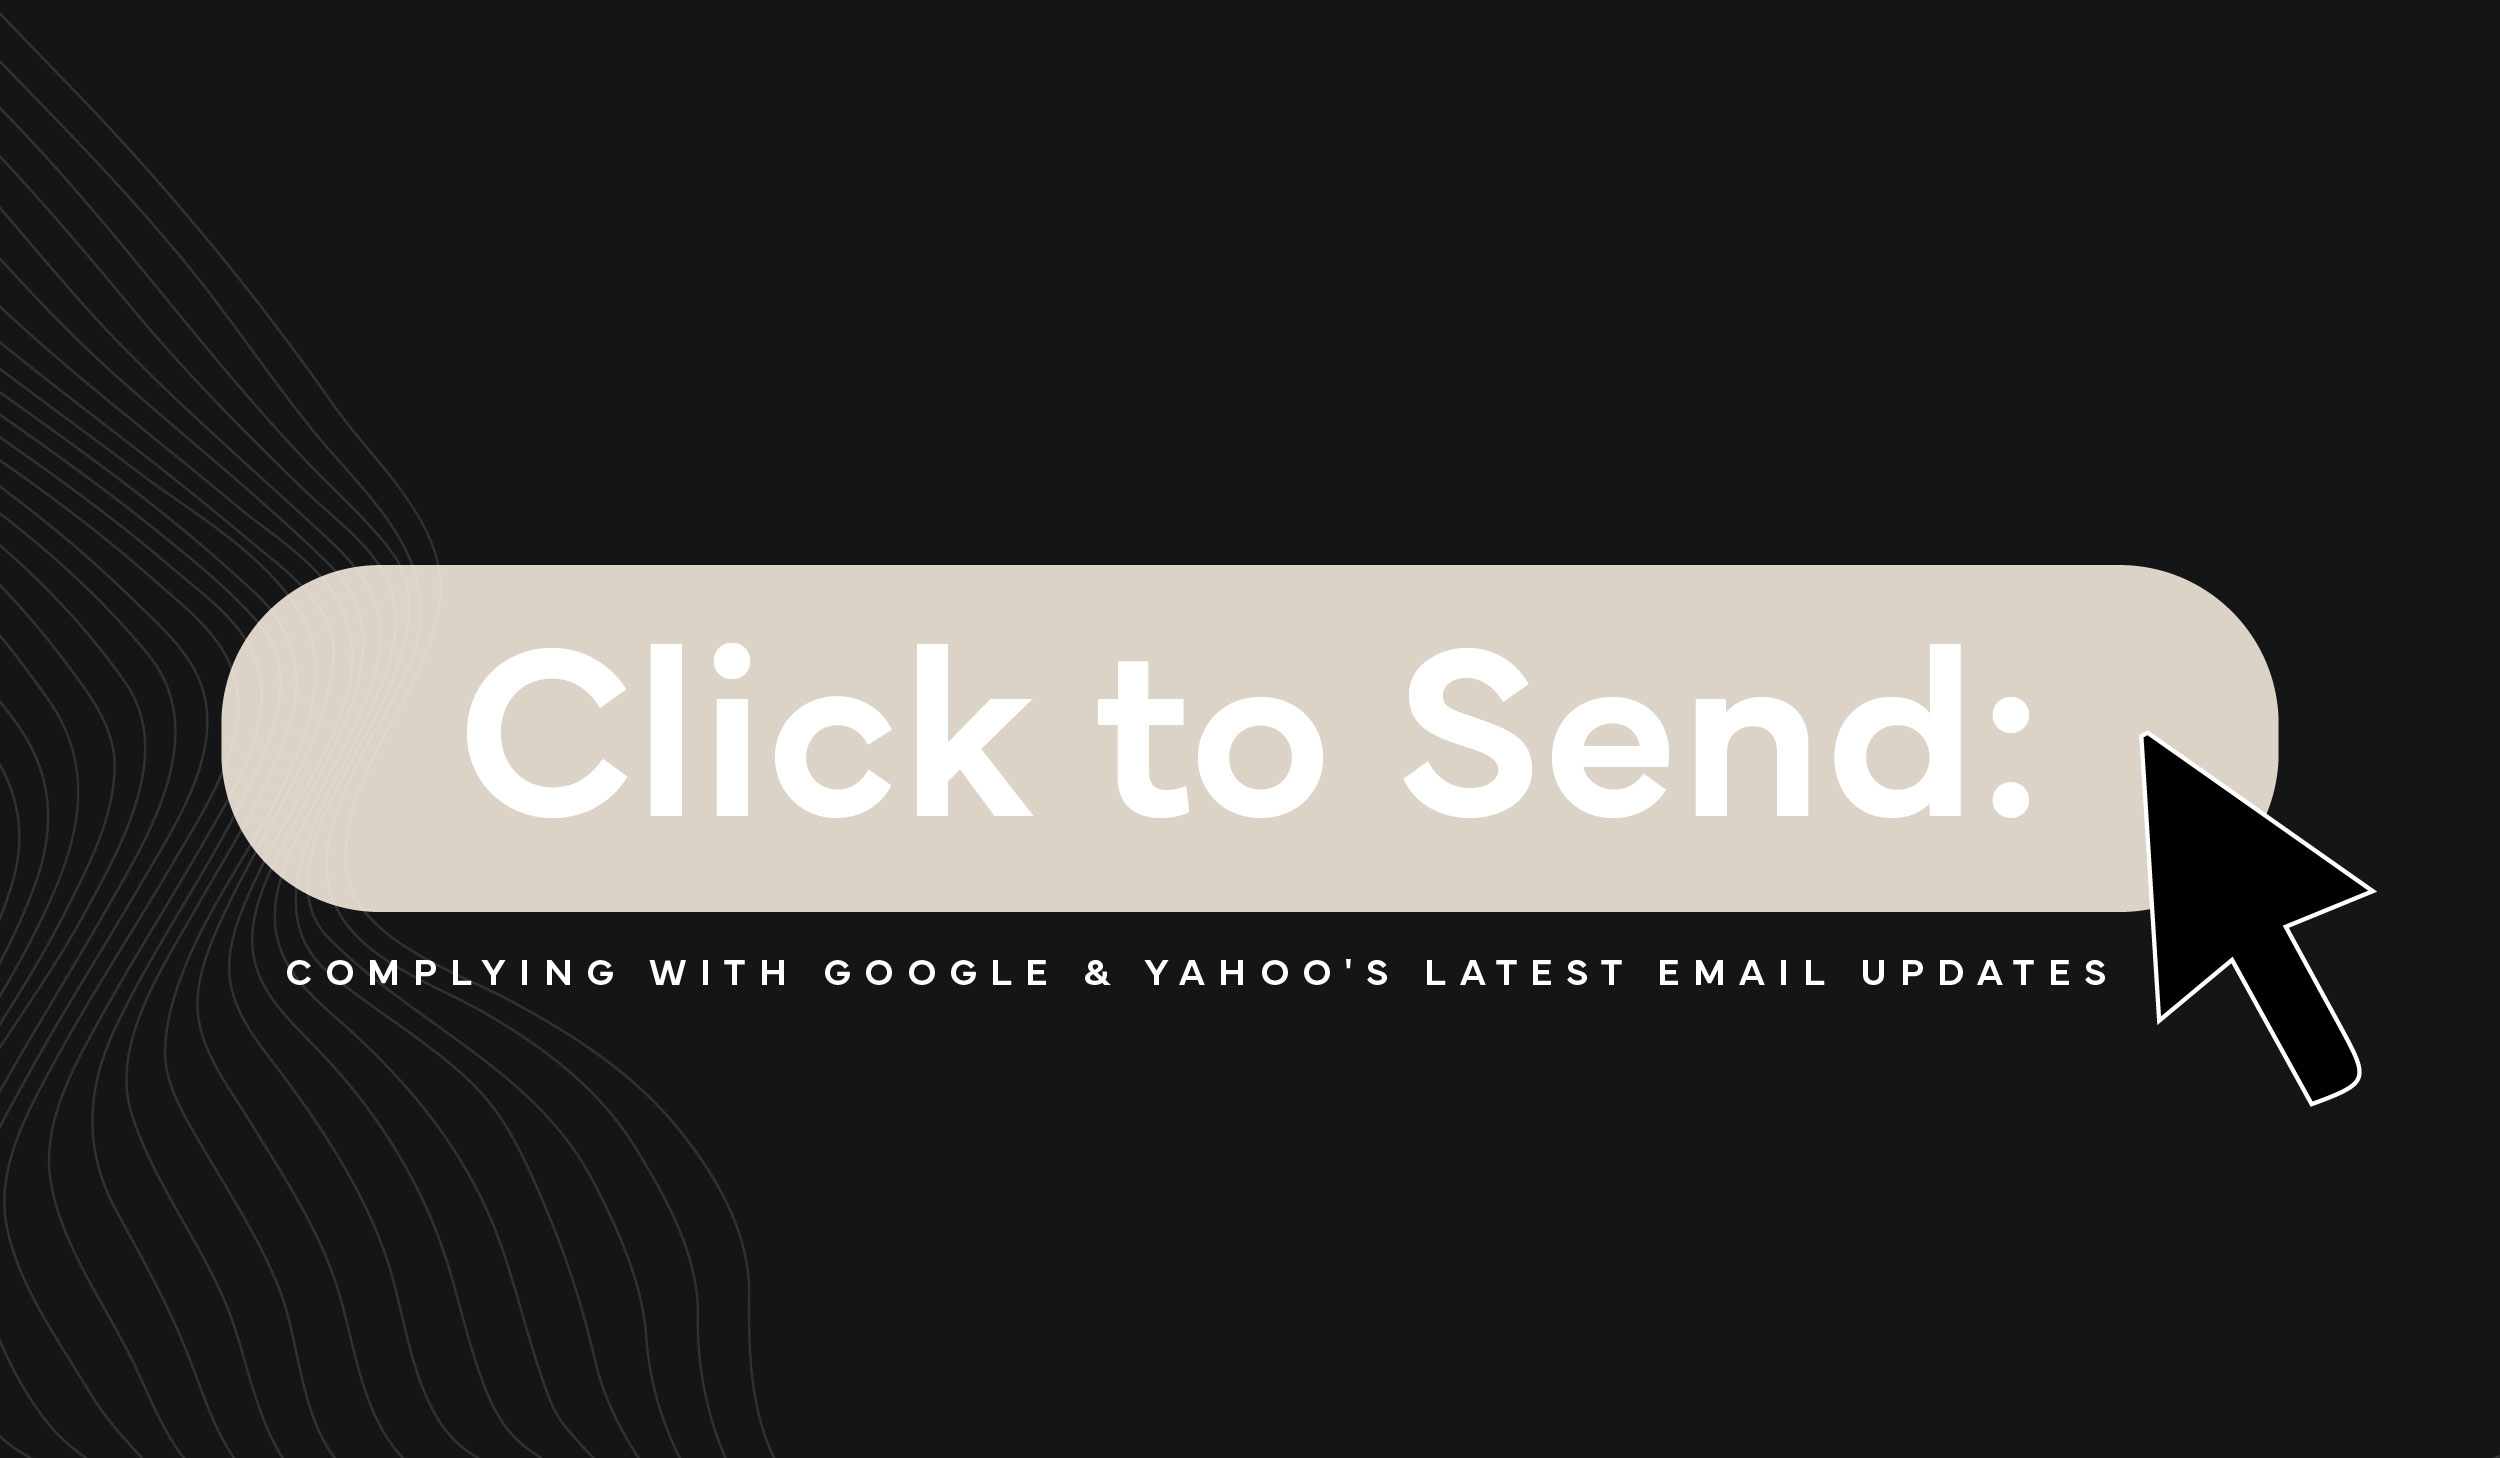 Emails & Marketing Updates for Yahoo and Google Senders